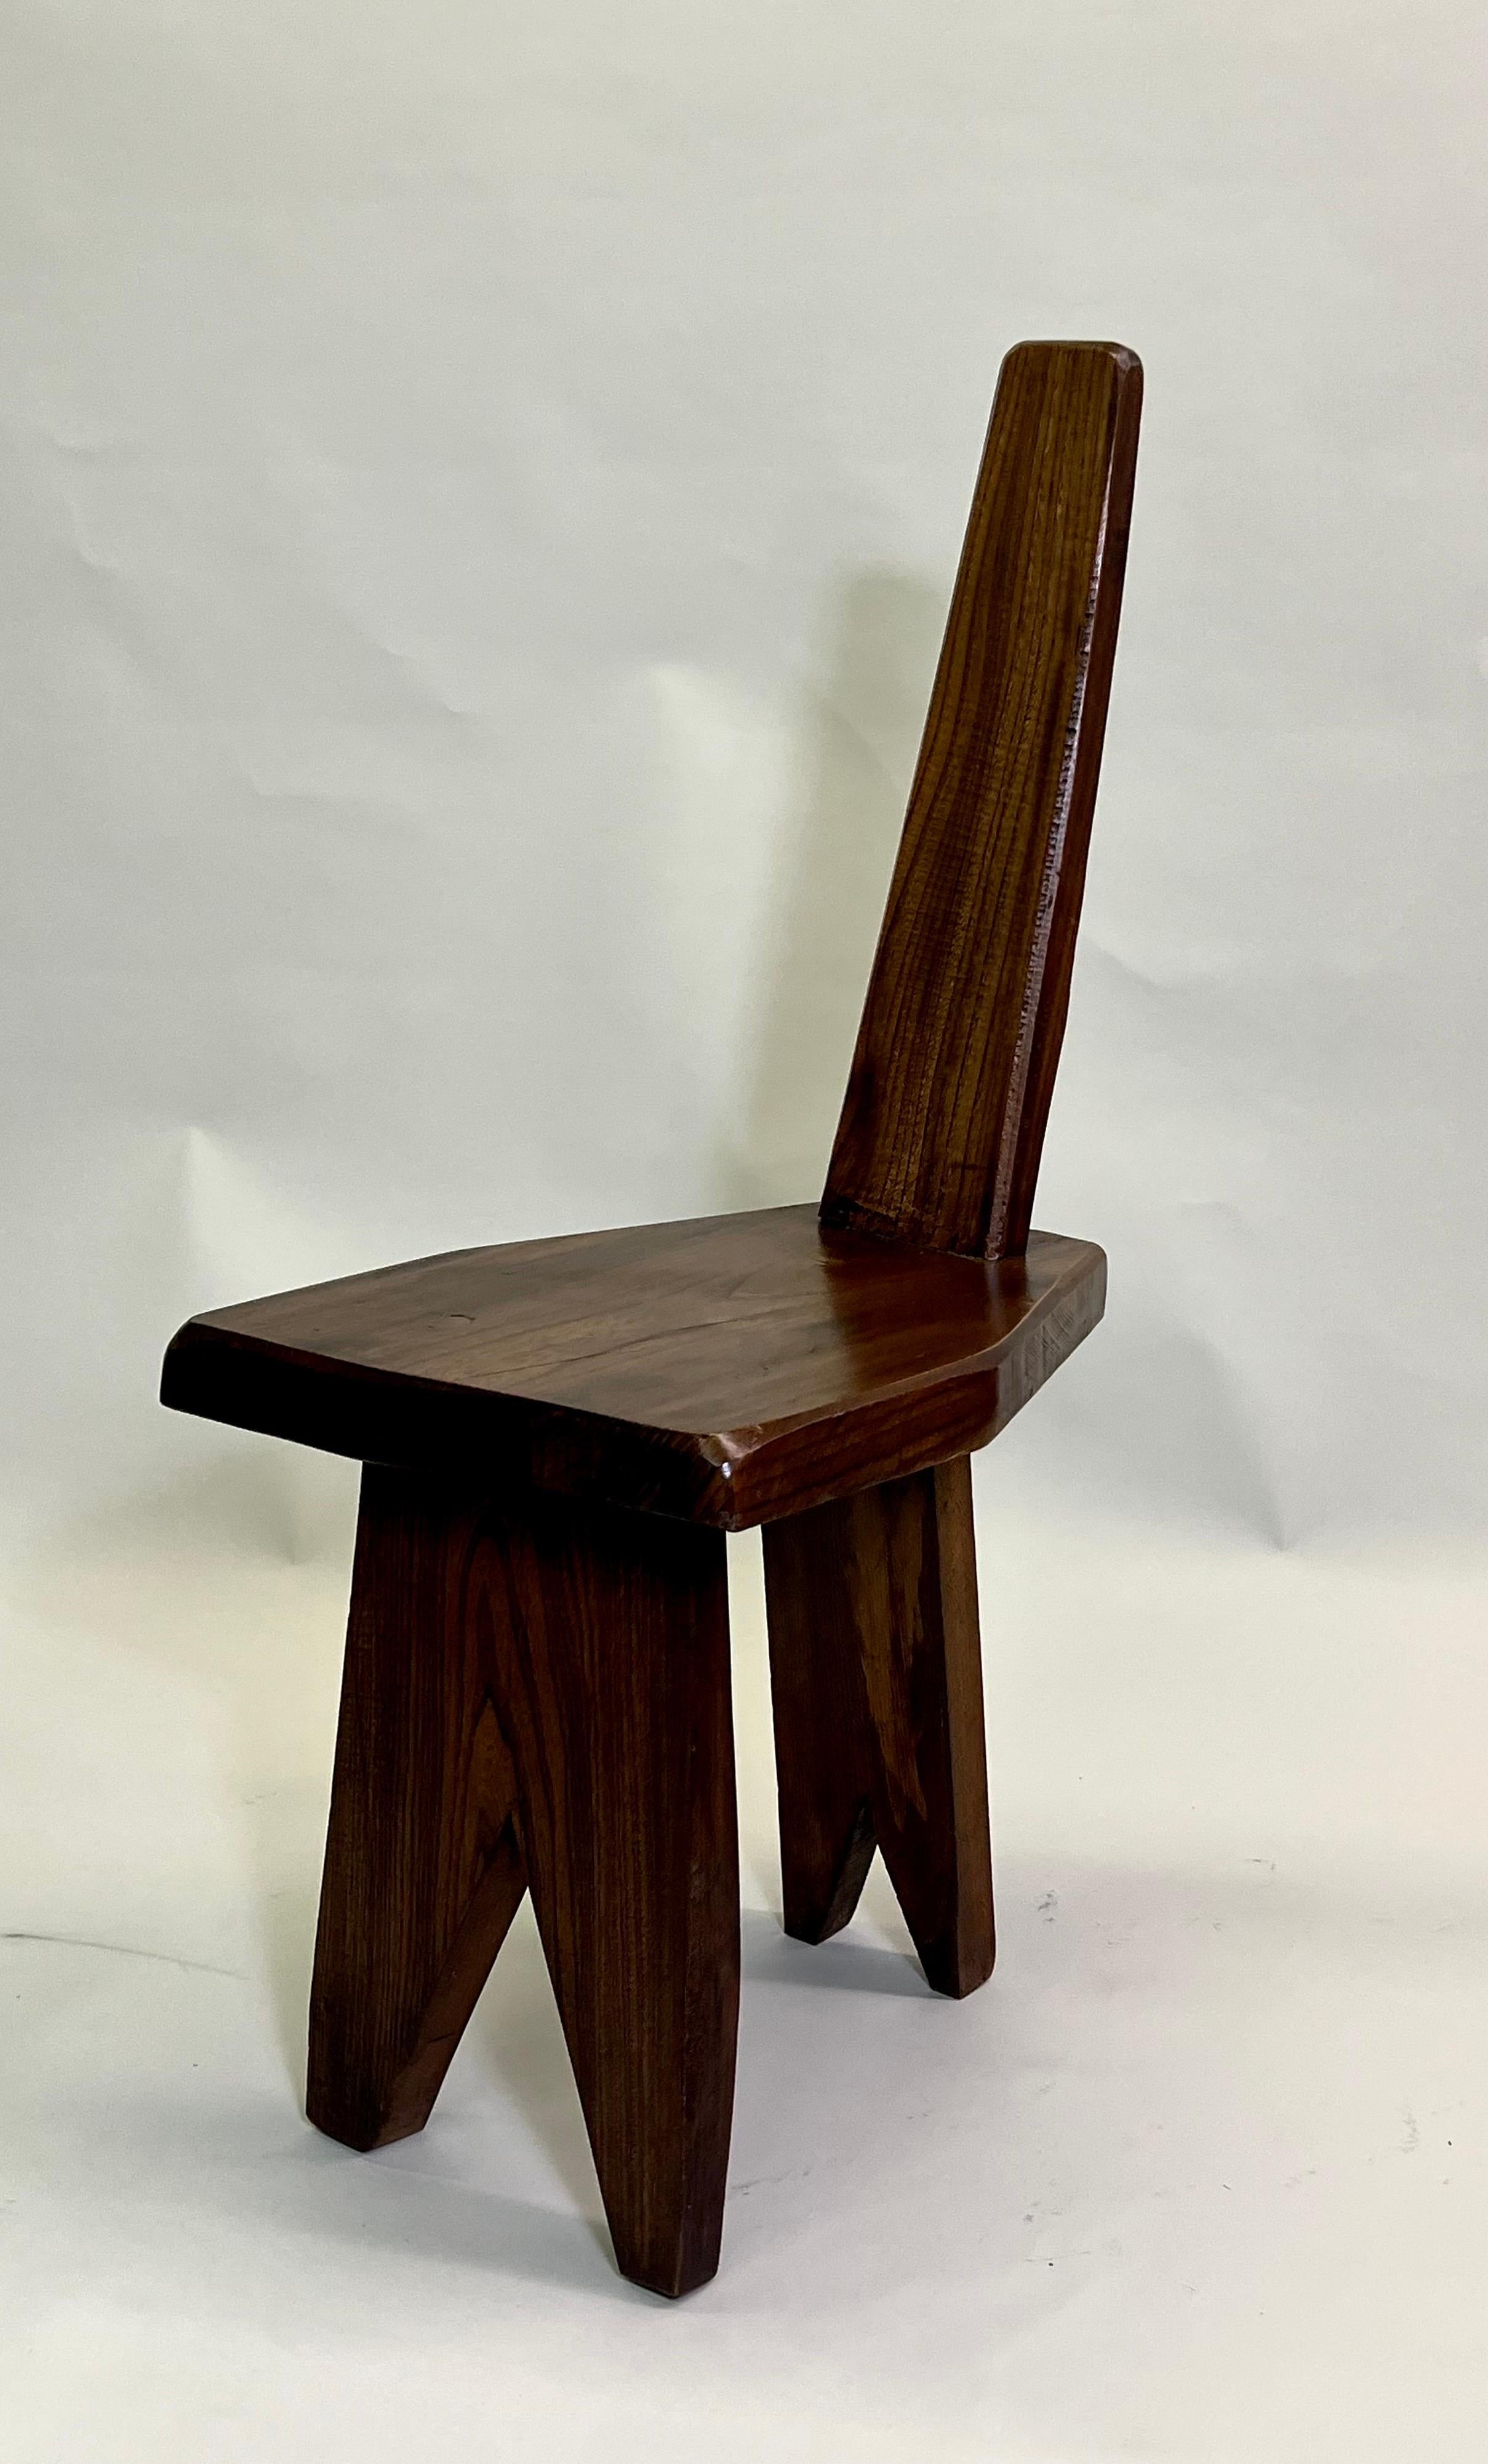 Rare Pair of French Mid-Century Modern Craftsman Wood Chairs, Pierre Jeanneret For Sale 1